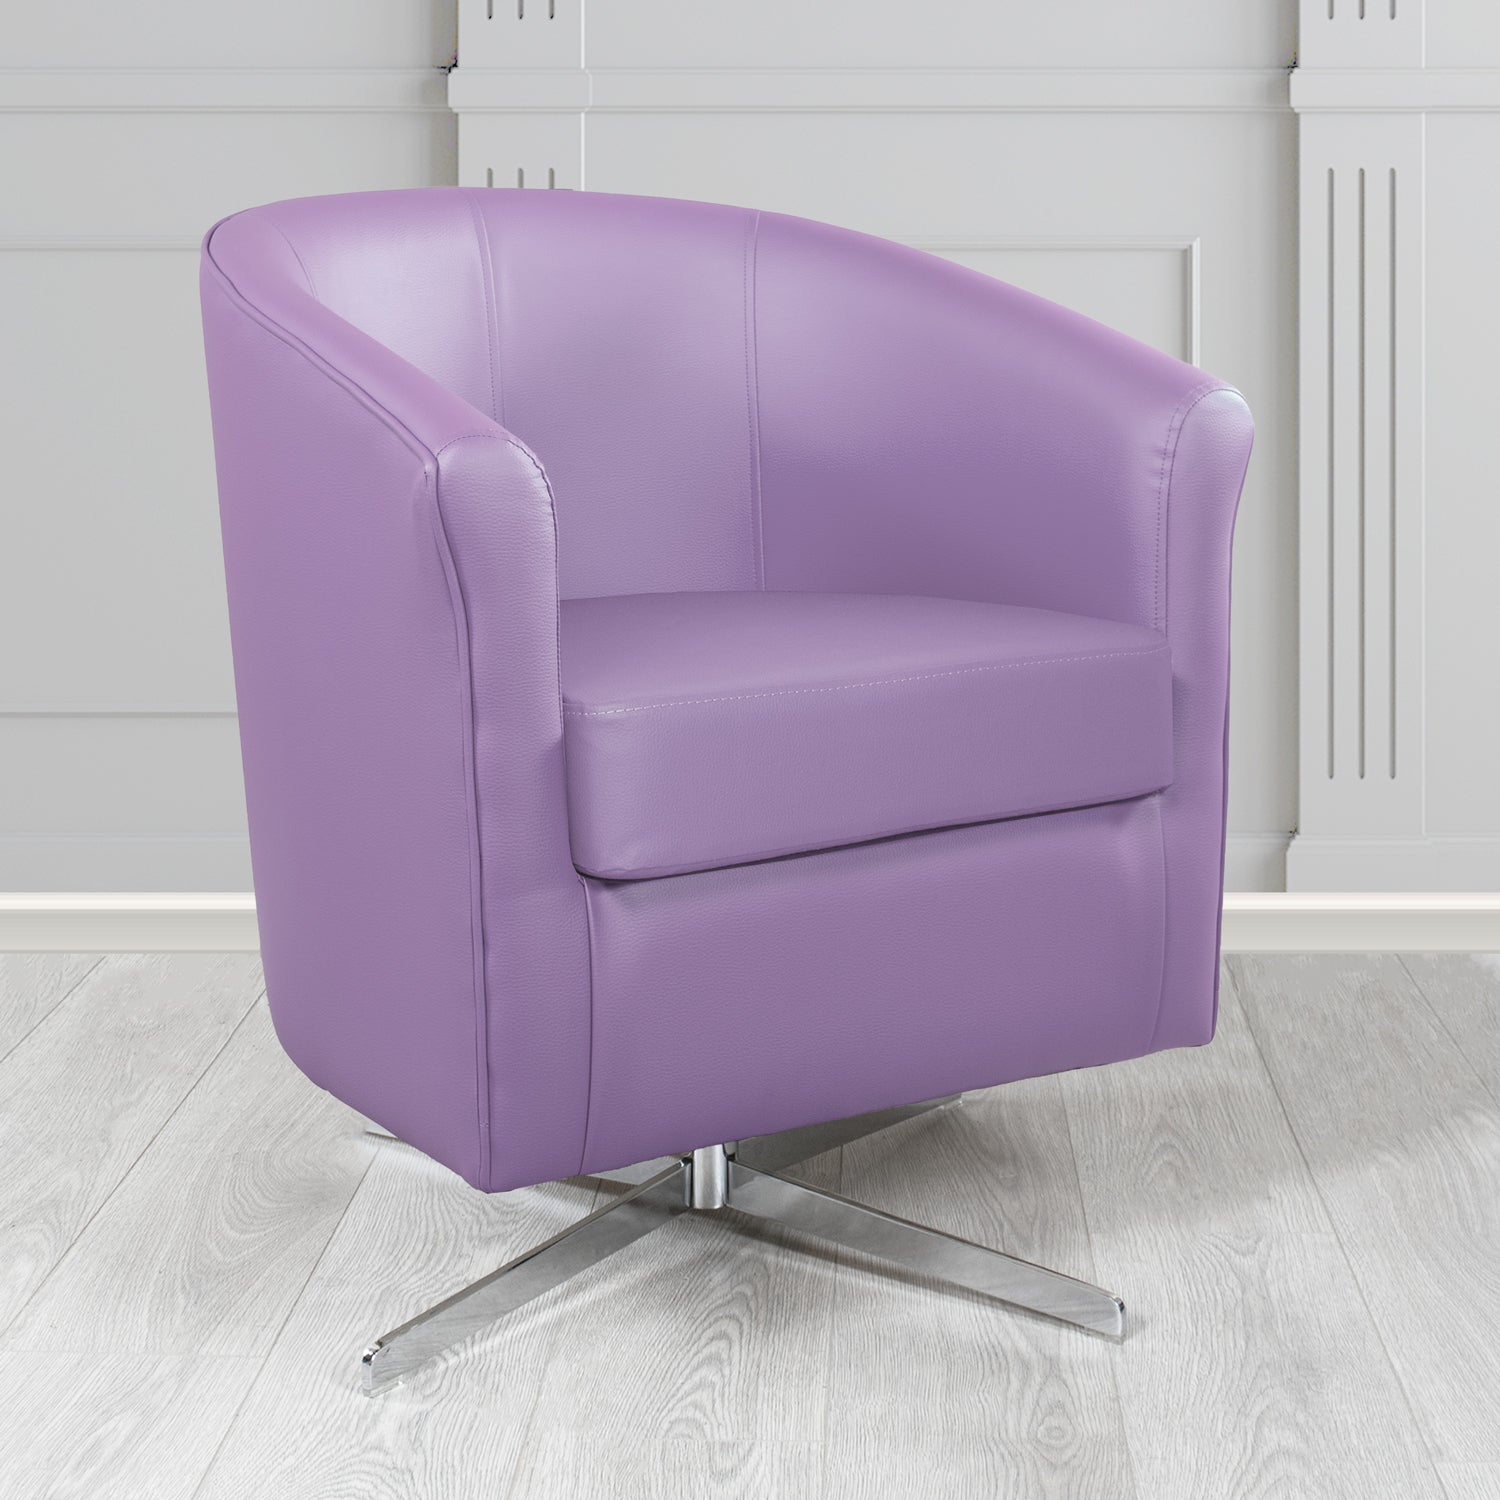 Cannes Swivel Tub Chair in Just Colour Lilac Crib 5 Faux Leather - The Tub Chair Shop